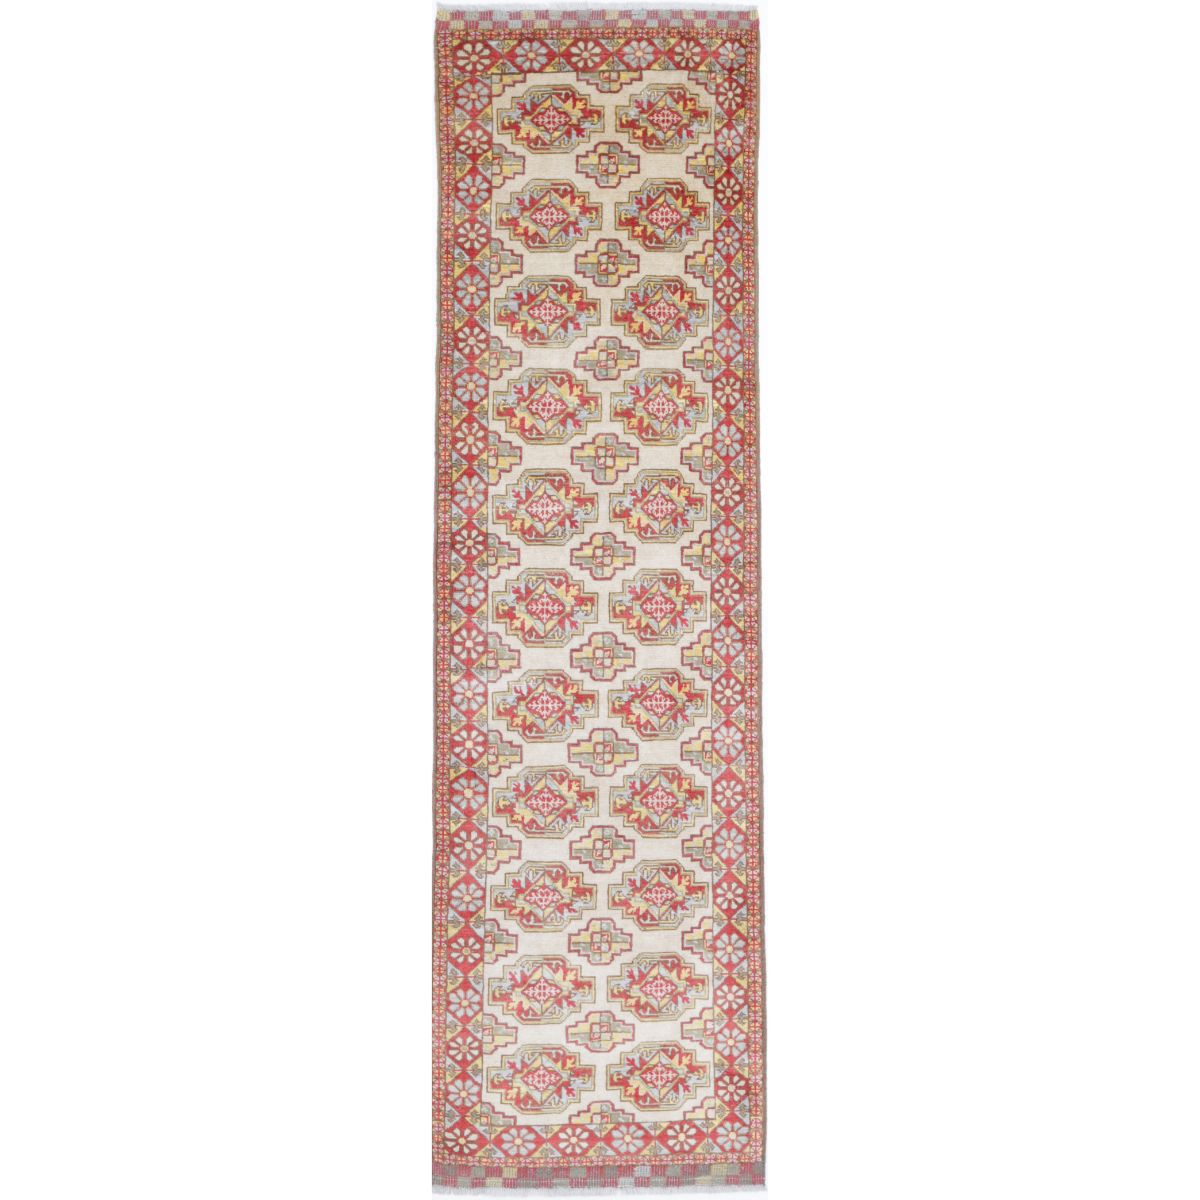 Revival 2' 7" X 9' 11" Wool Hand Knotted Rug